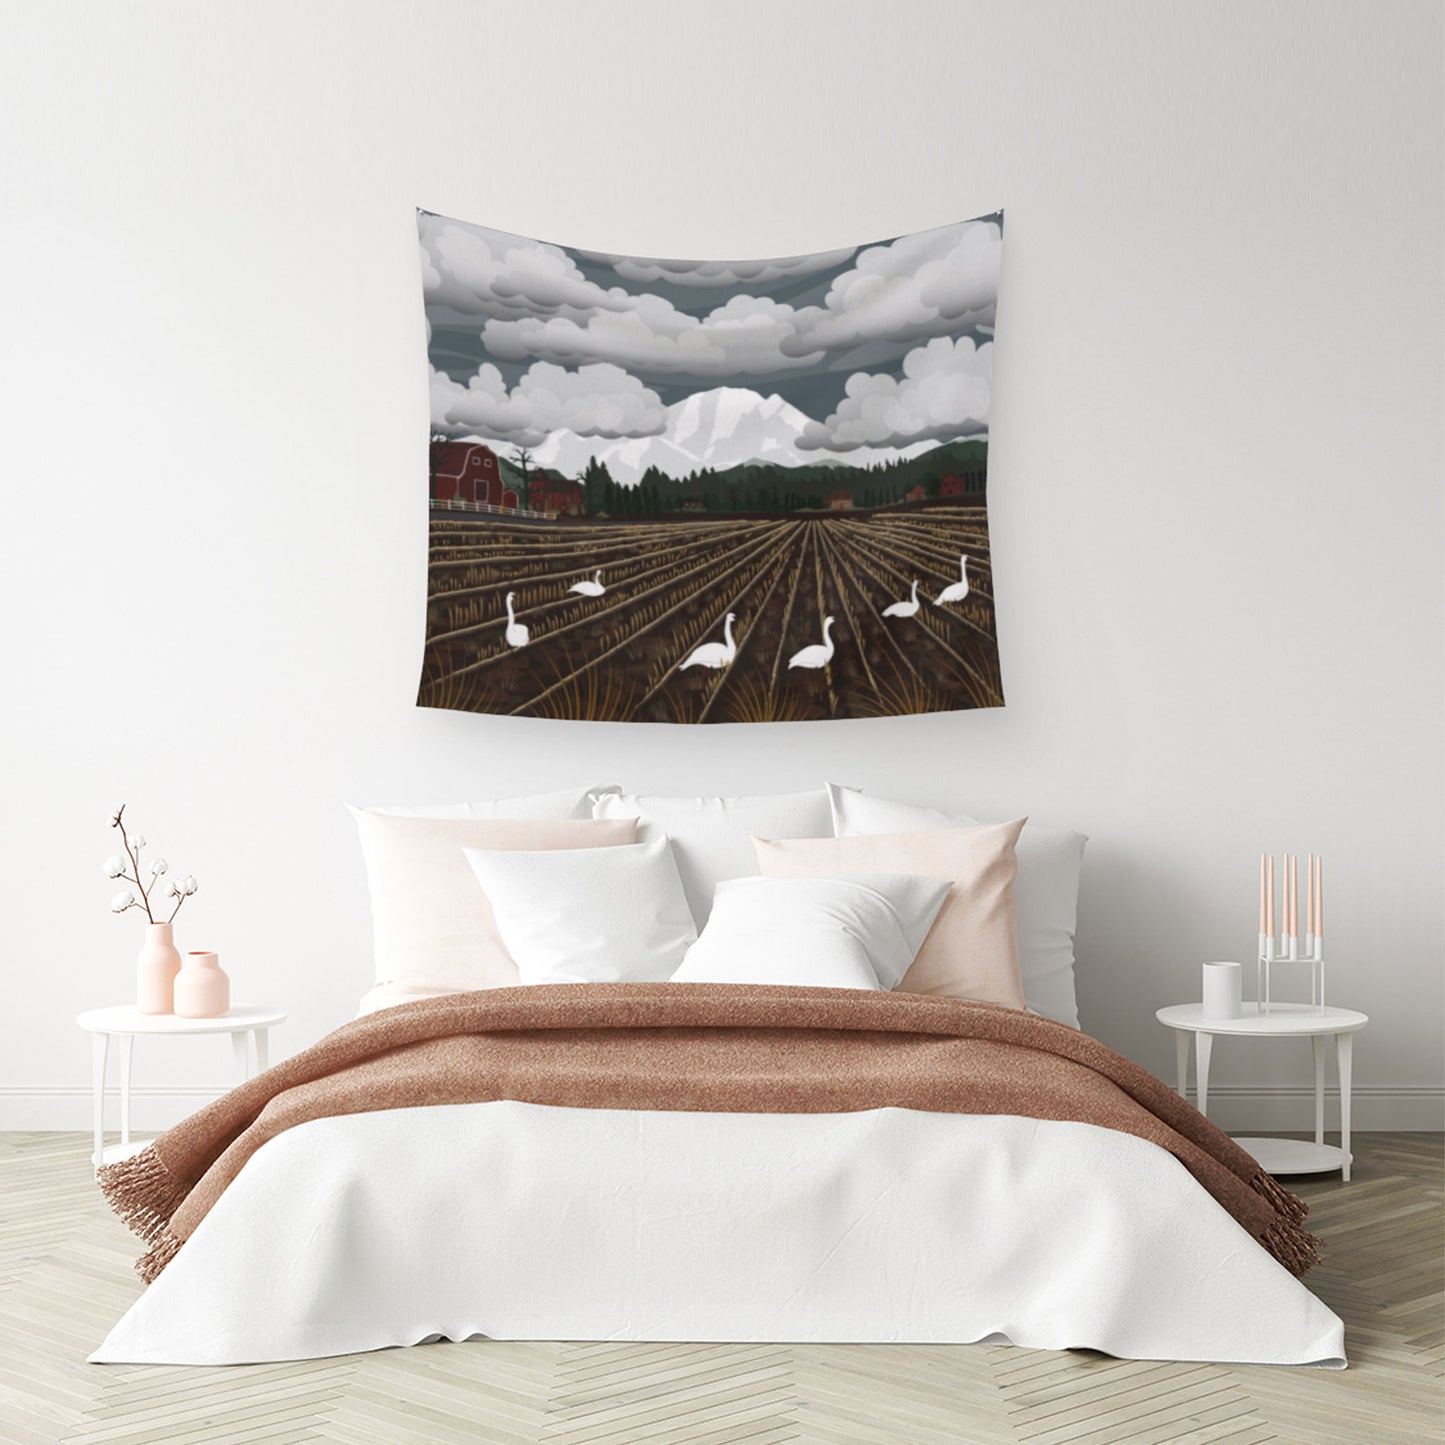 mockup for tapestry with digital design showing Swans frolic in the mud below Mt Baker with clouds over it as a surprised barn watches, the tapestry is above a bed scene with pillows and a few blankets